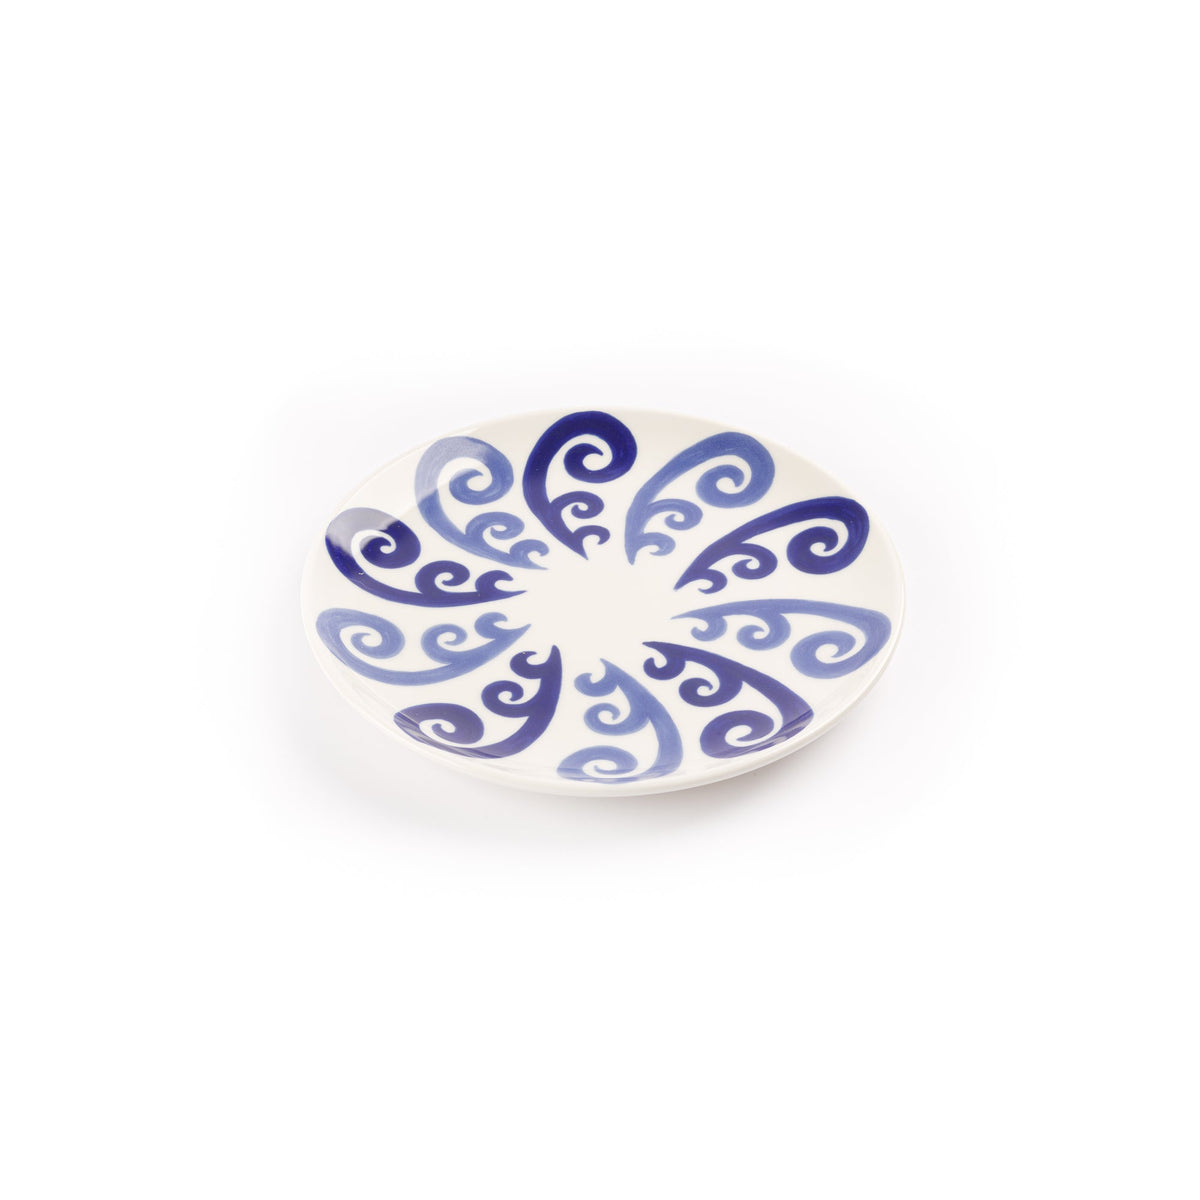 Athenee Two Tone Blue Peacock Dessert Plate